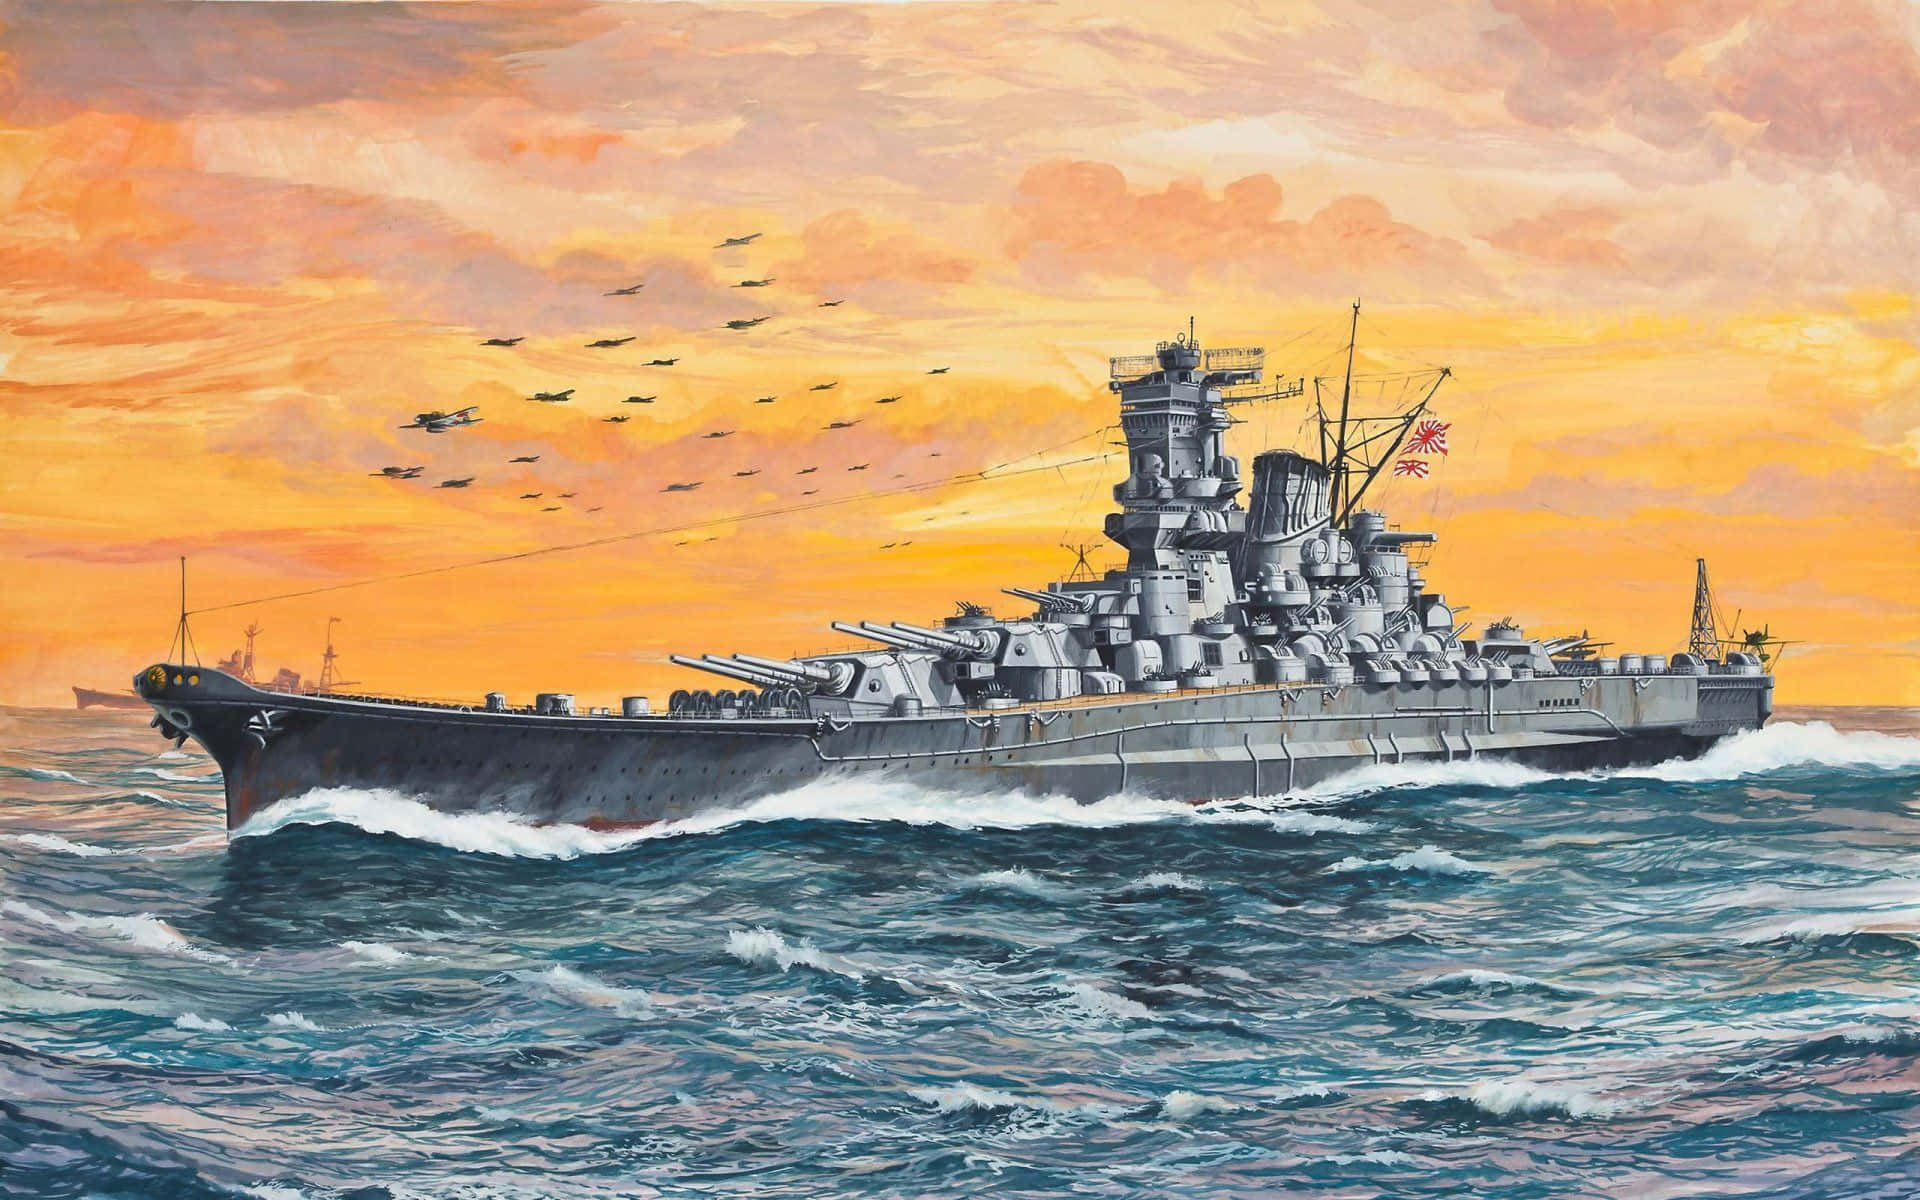 A Painting Of A Battleship In The Ocean